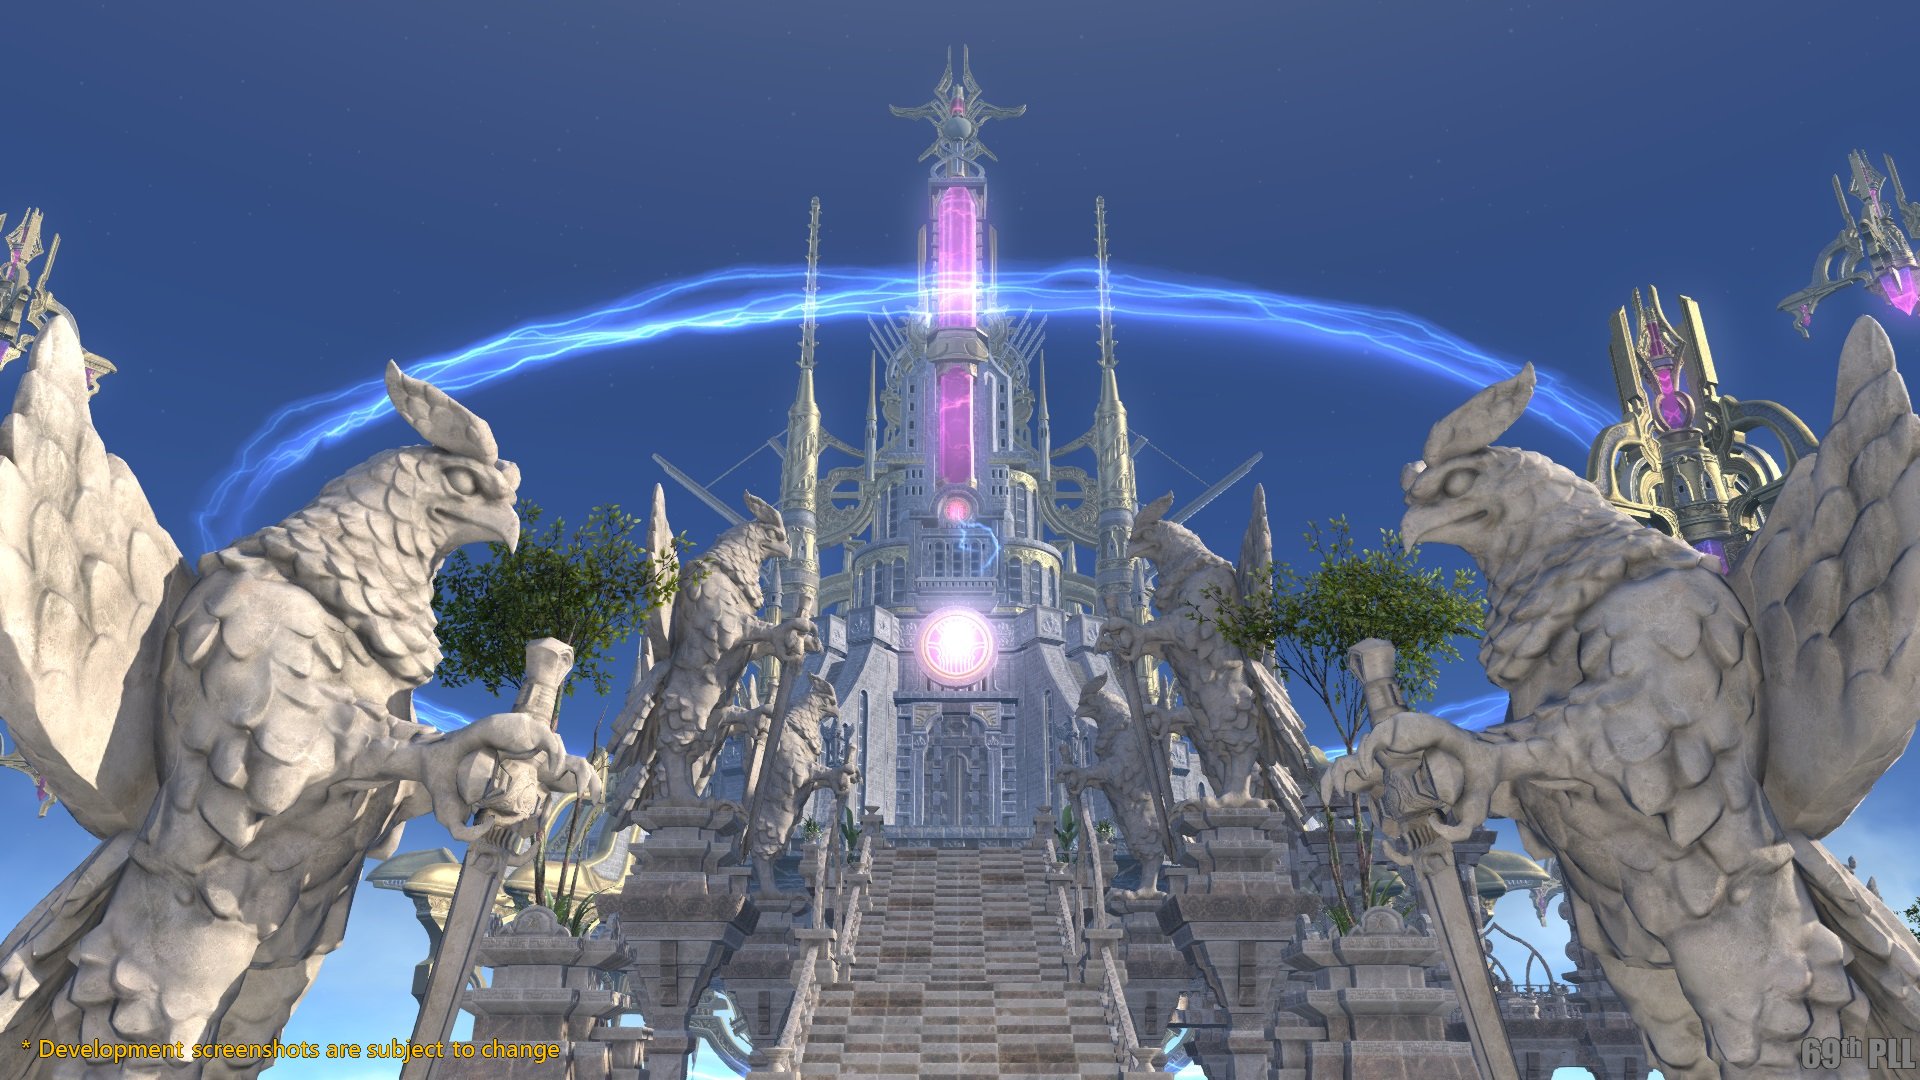 A developmental screenshot from FINAL FANTASY 14 of a grand tower surrounded by winged statues. Text at bottom reads *Development screenshots are subject to change.